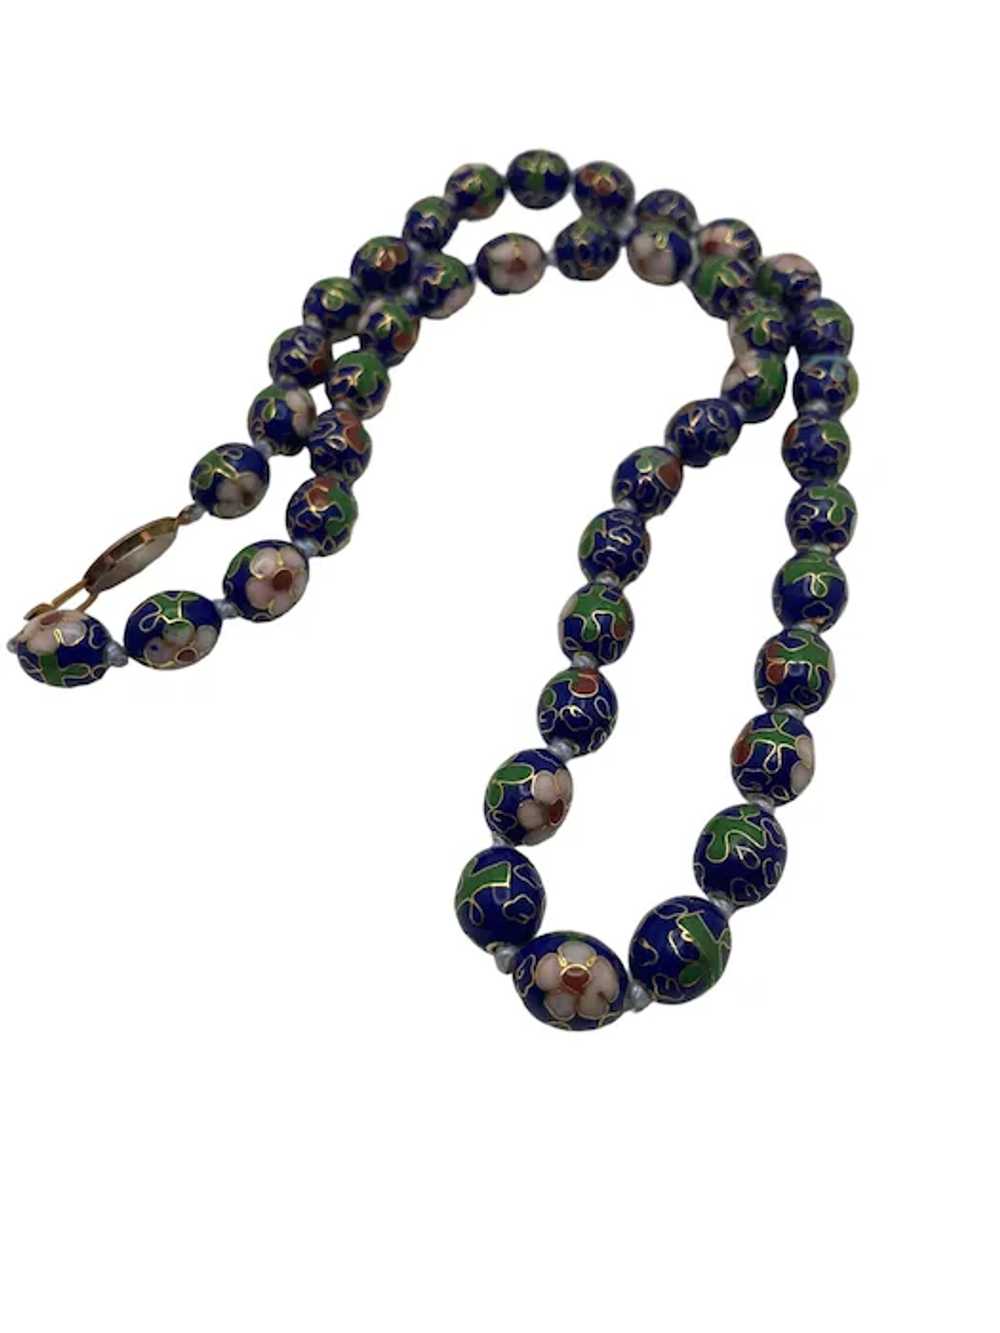 Vintage Chinese Cloisonne Oval Bead Necklace - image 4